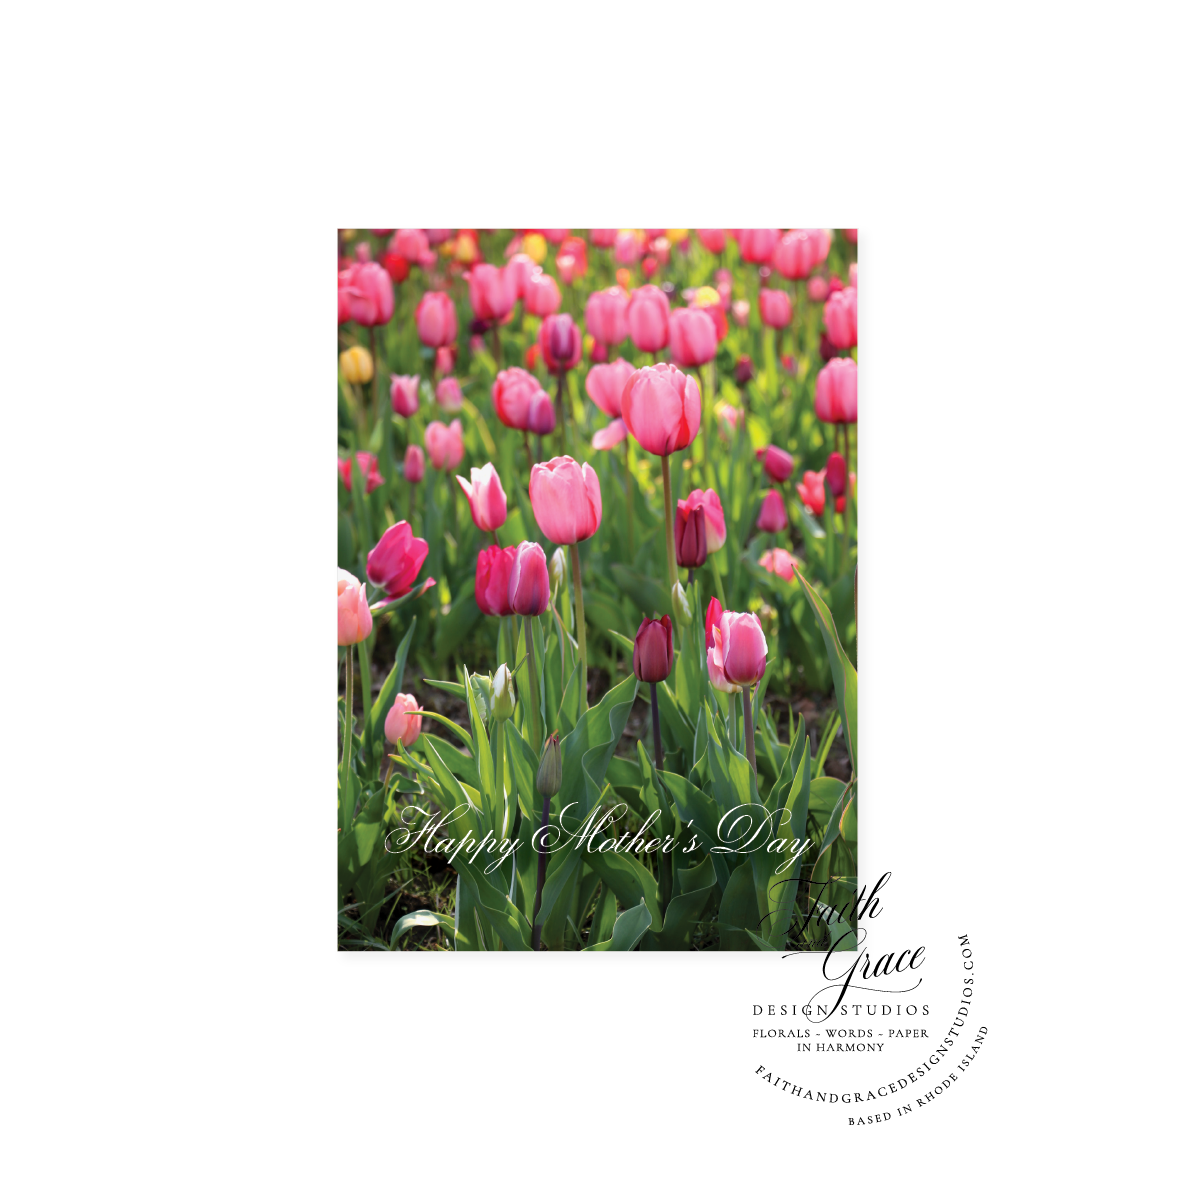 Field of Pink Tulips featuring Happy Mothers Day in Script